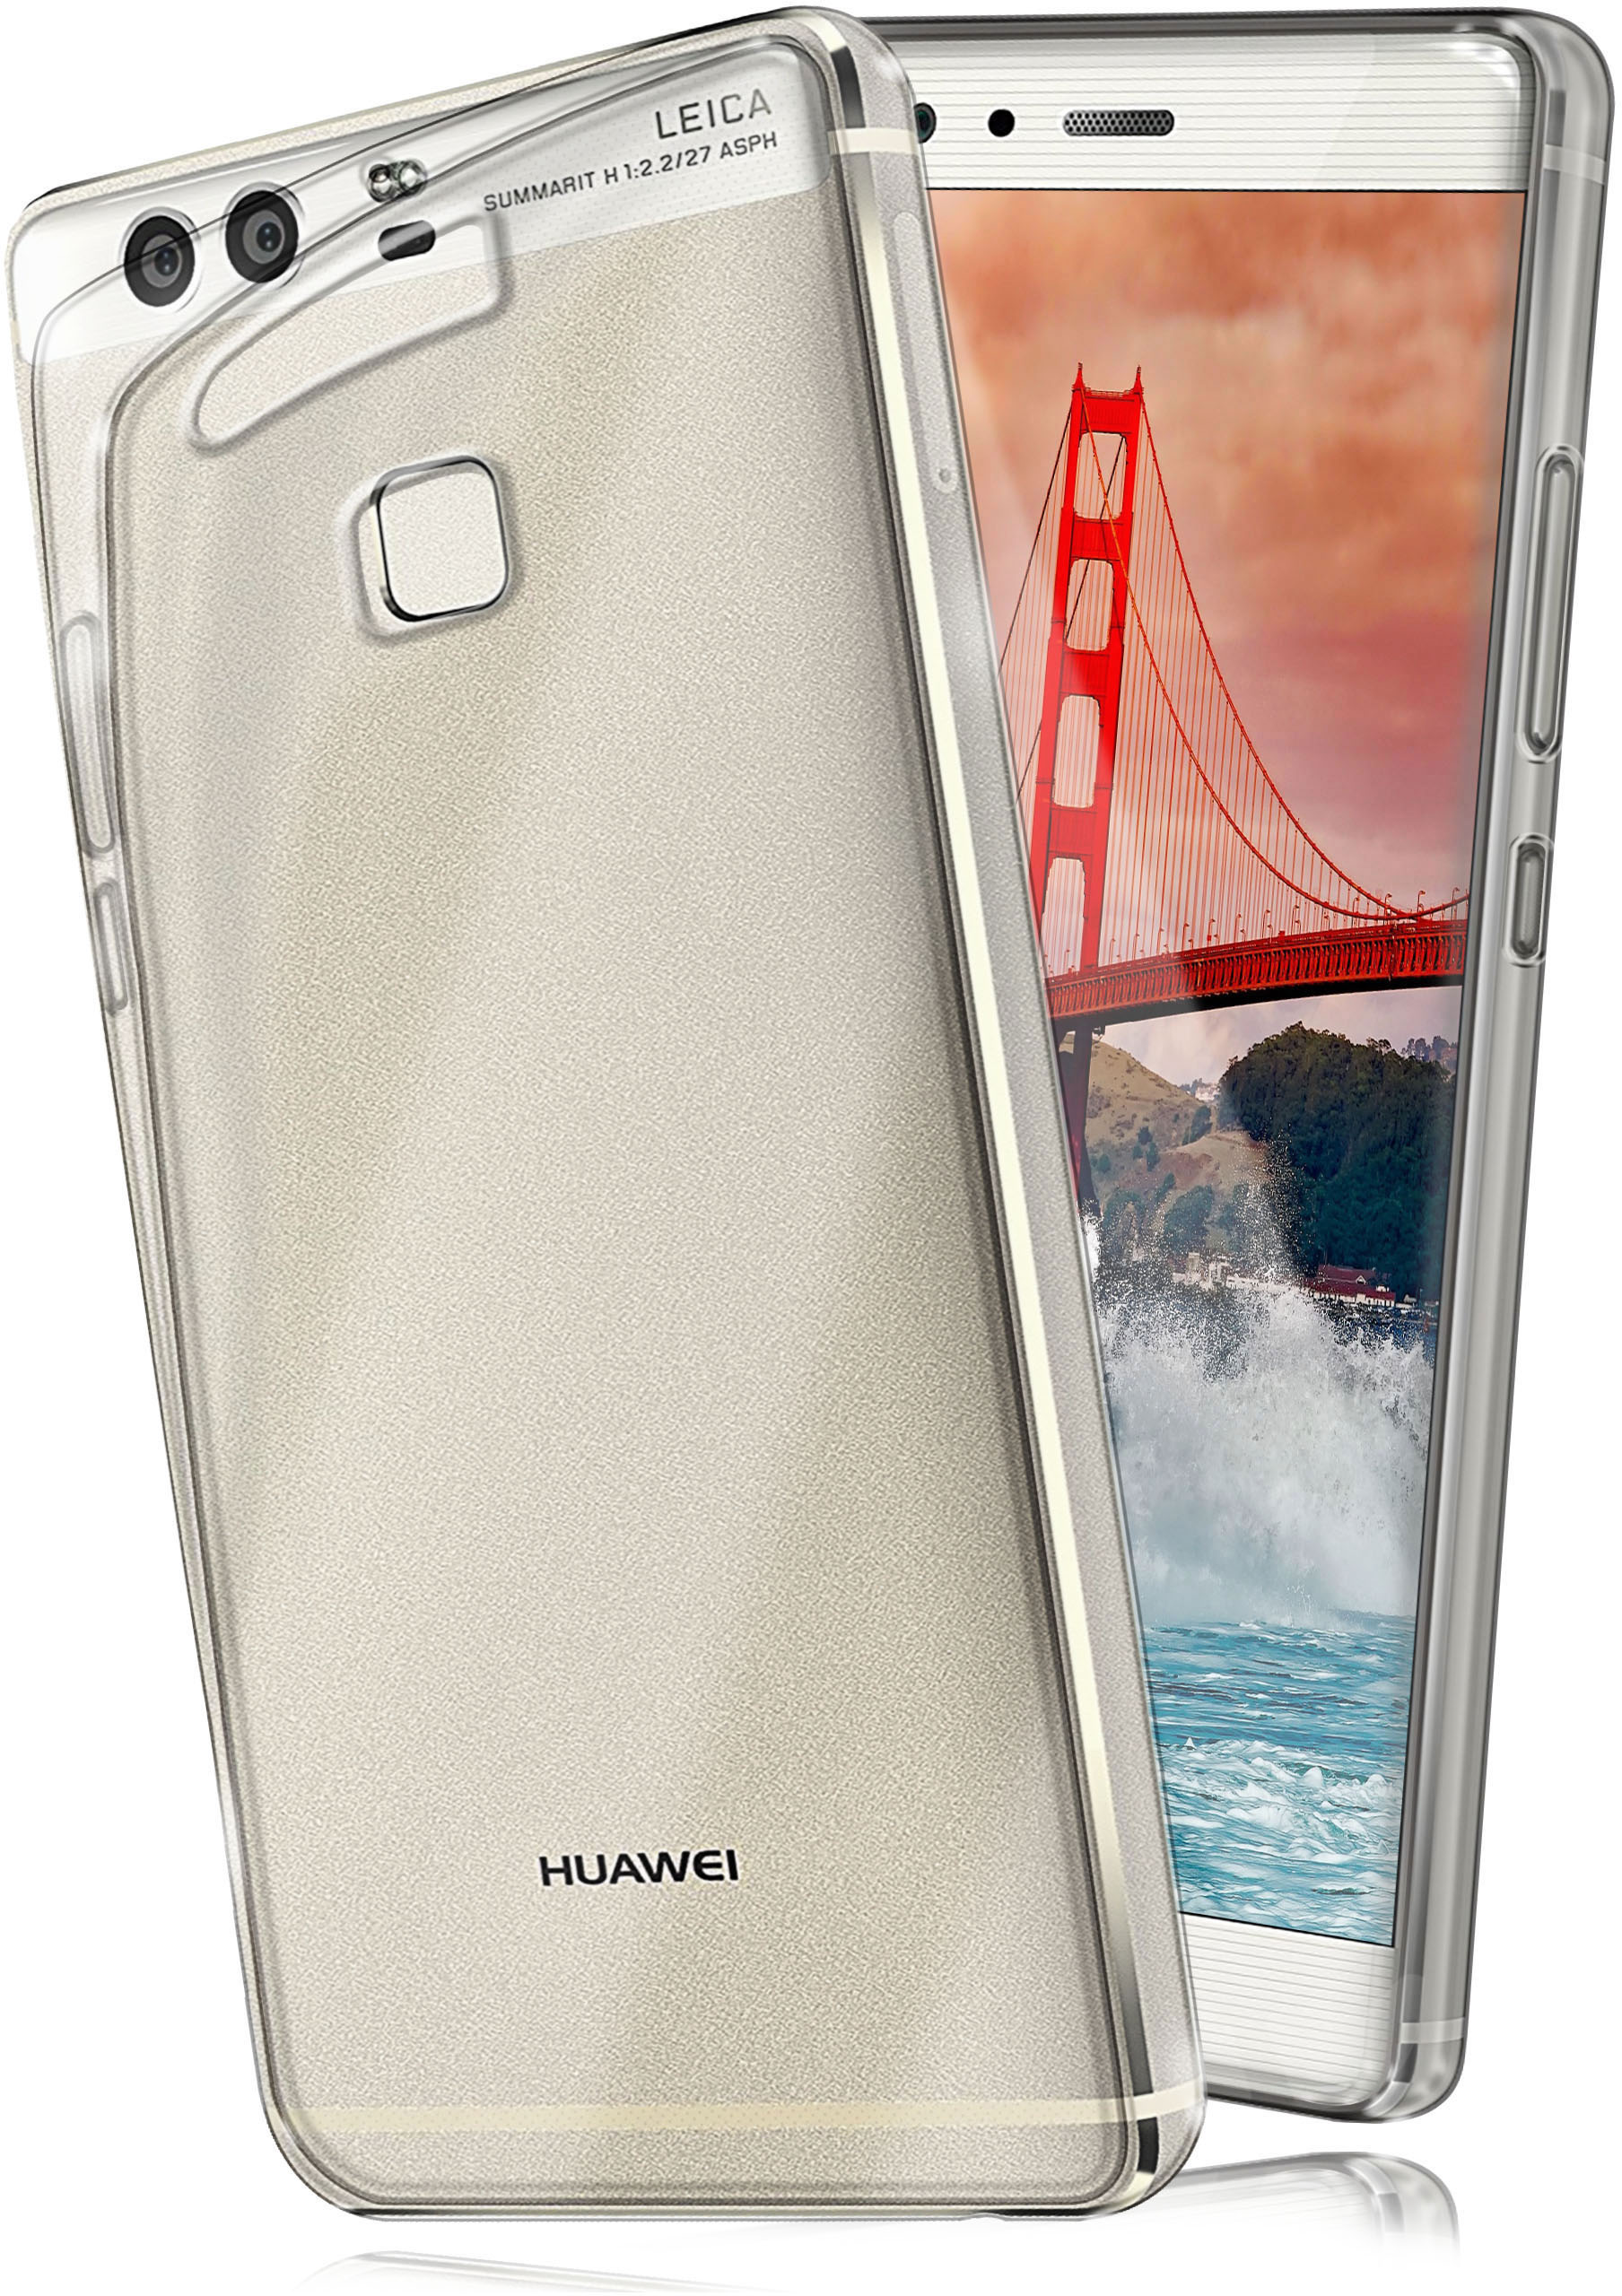 Huawei, Aero Crystal-Clear Backcover, P9, Case, MOEX